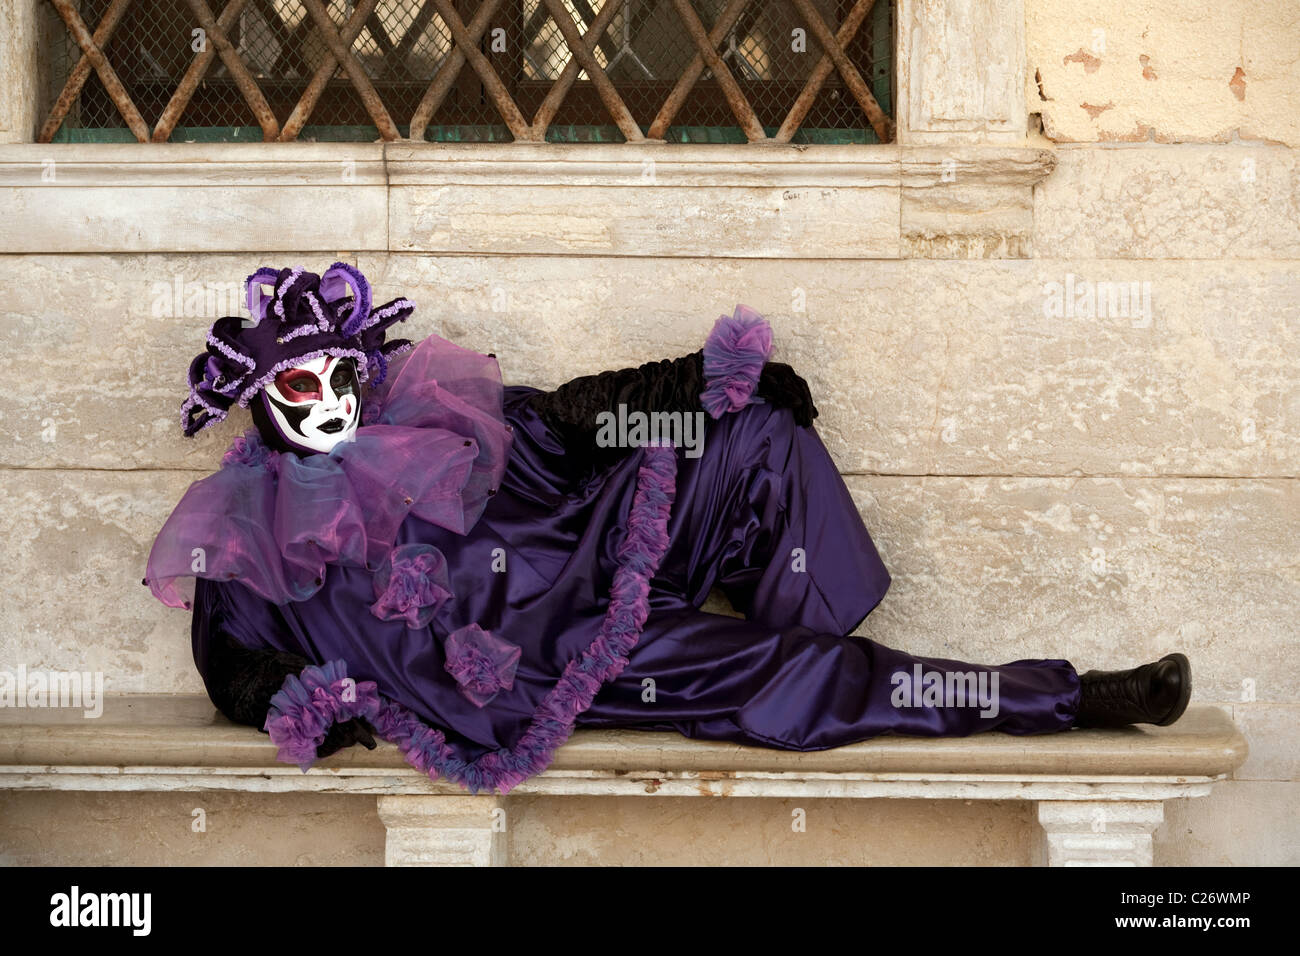 Lazy character in costume, the Carnival, Venice, Italy Stock Photo